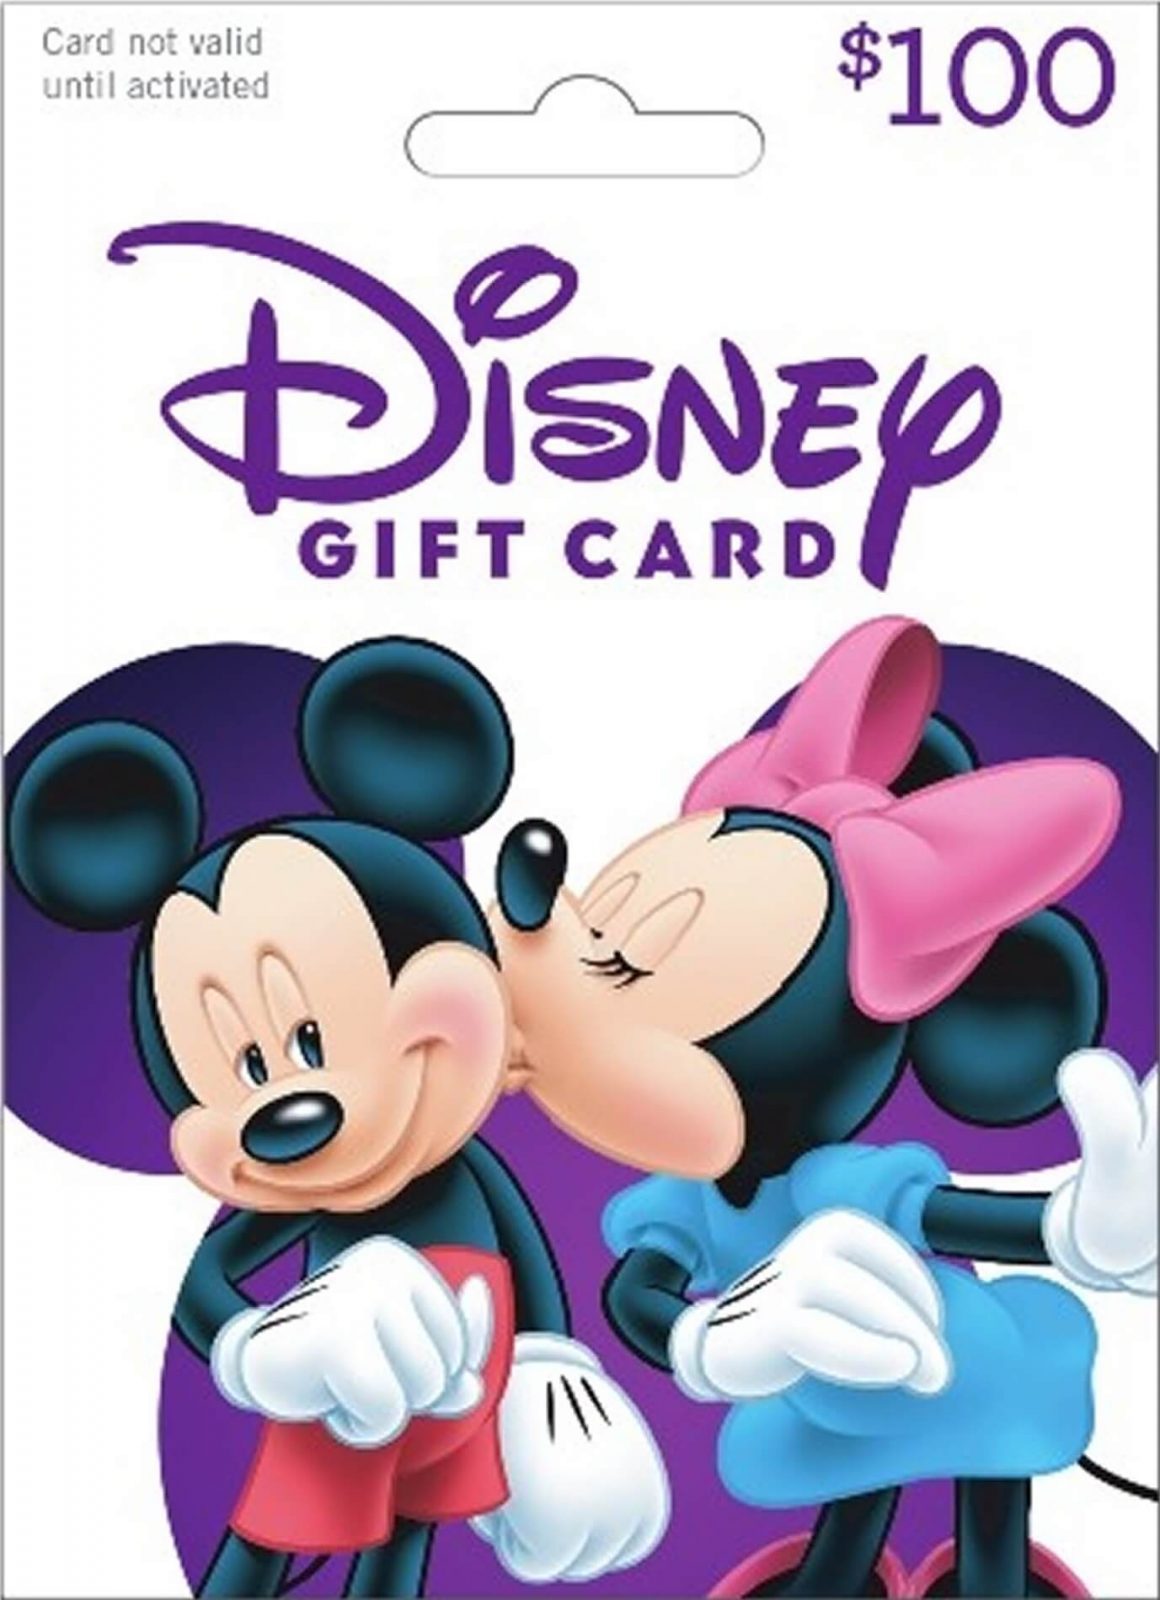 one hundred dollar Disney Gift Card with picture of MIckey Mouse kissing MIckey Mouse